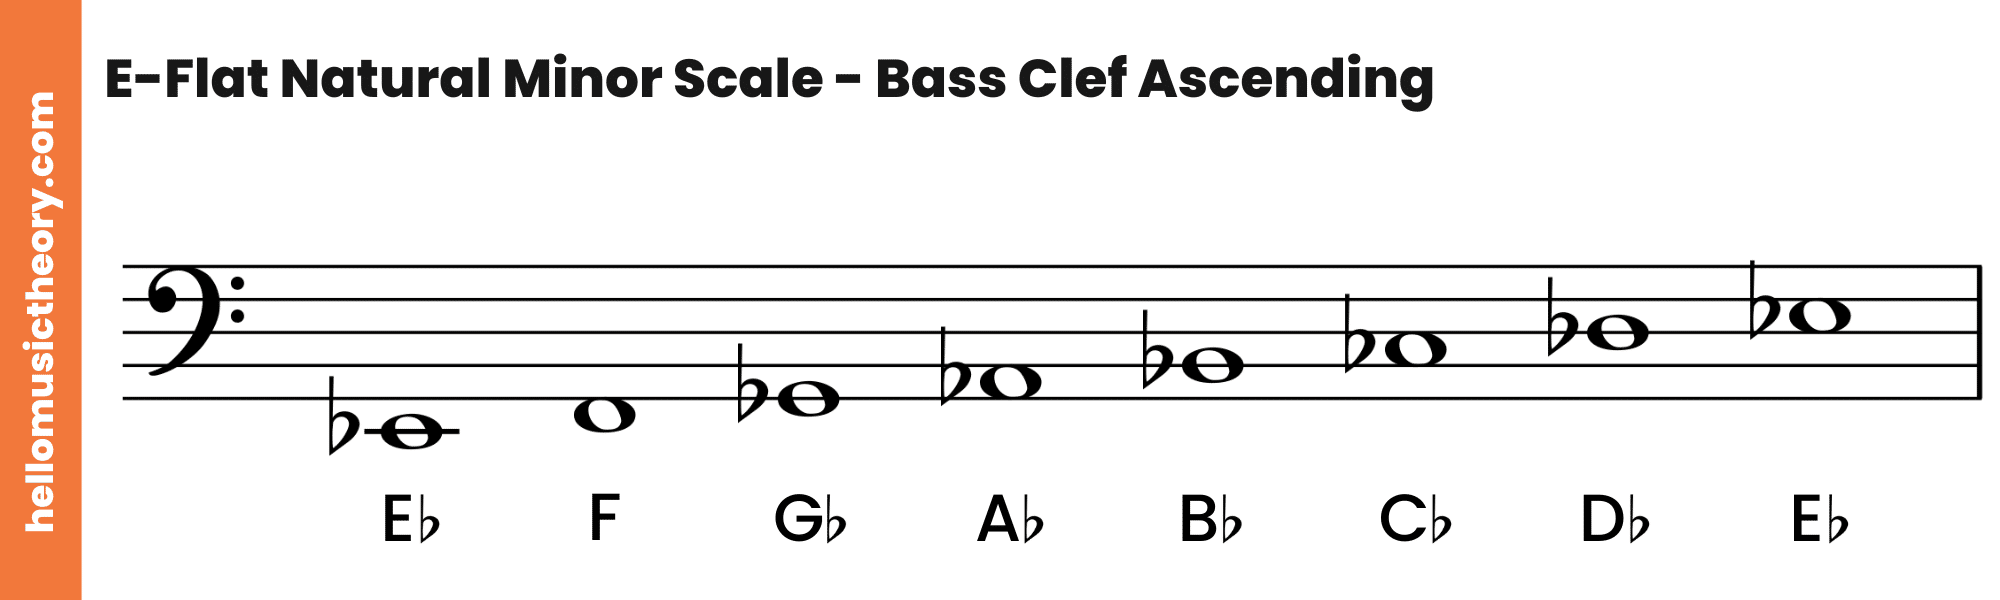 E-Flat Natural Minor Scale Bass Clef Ascending